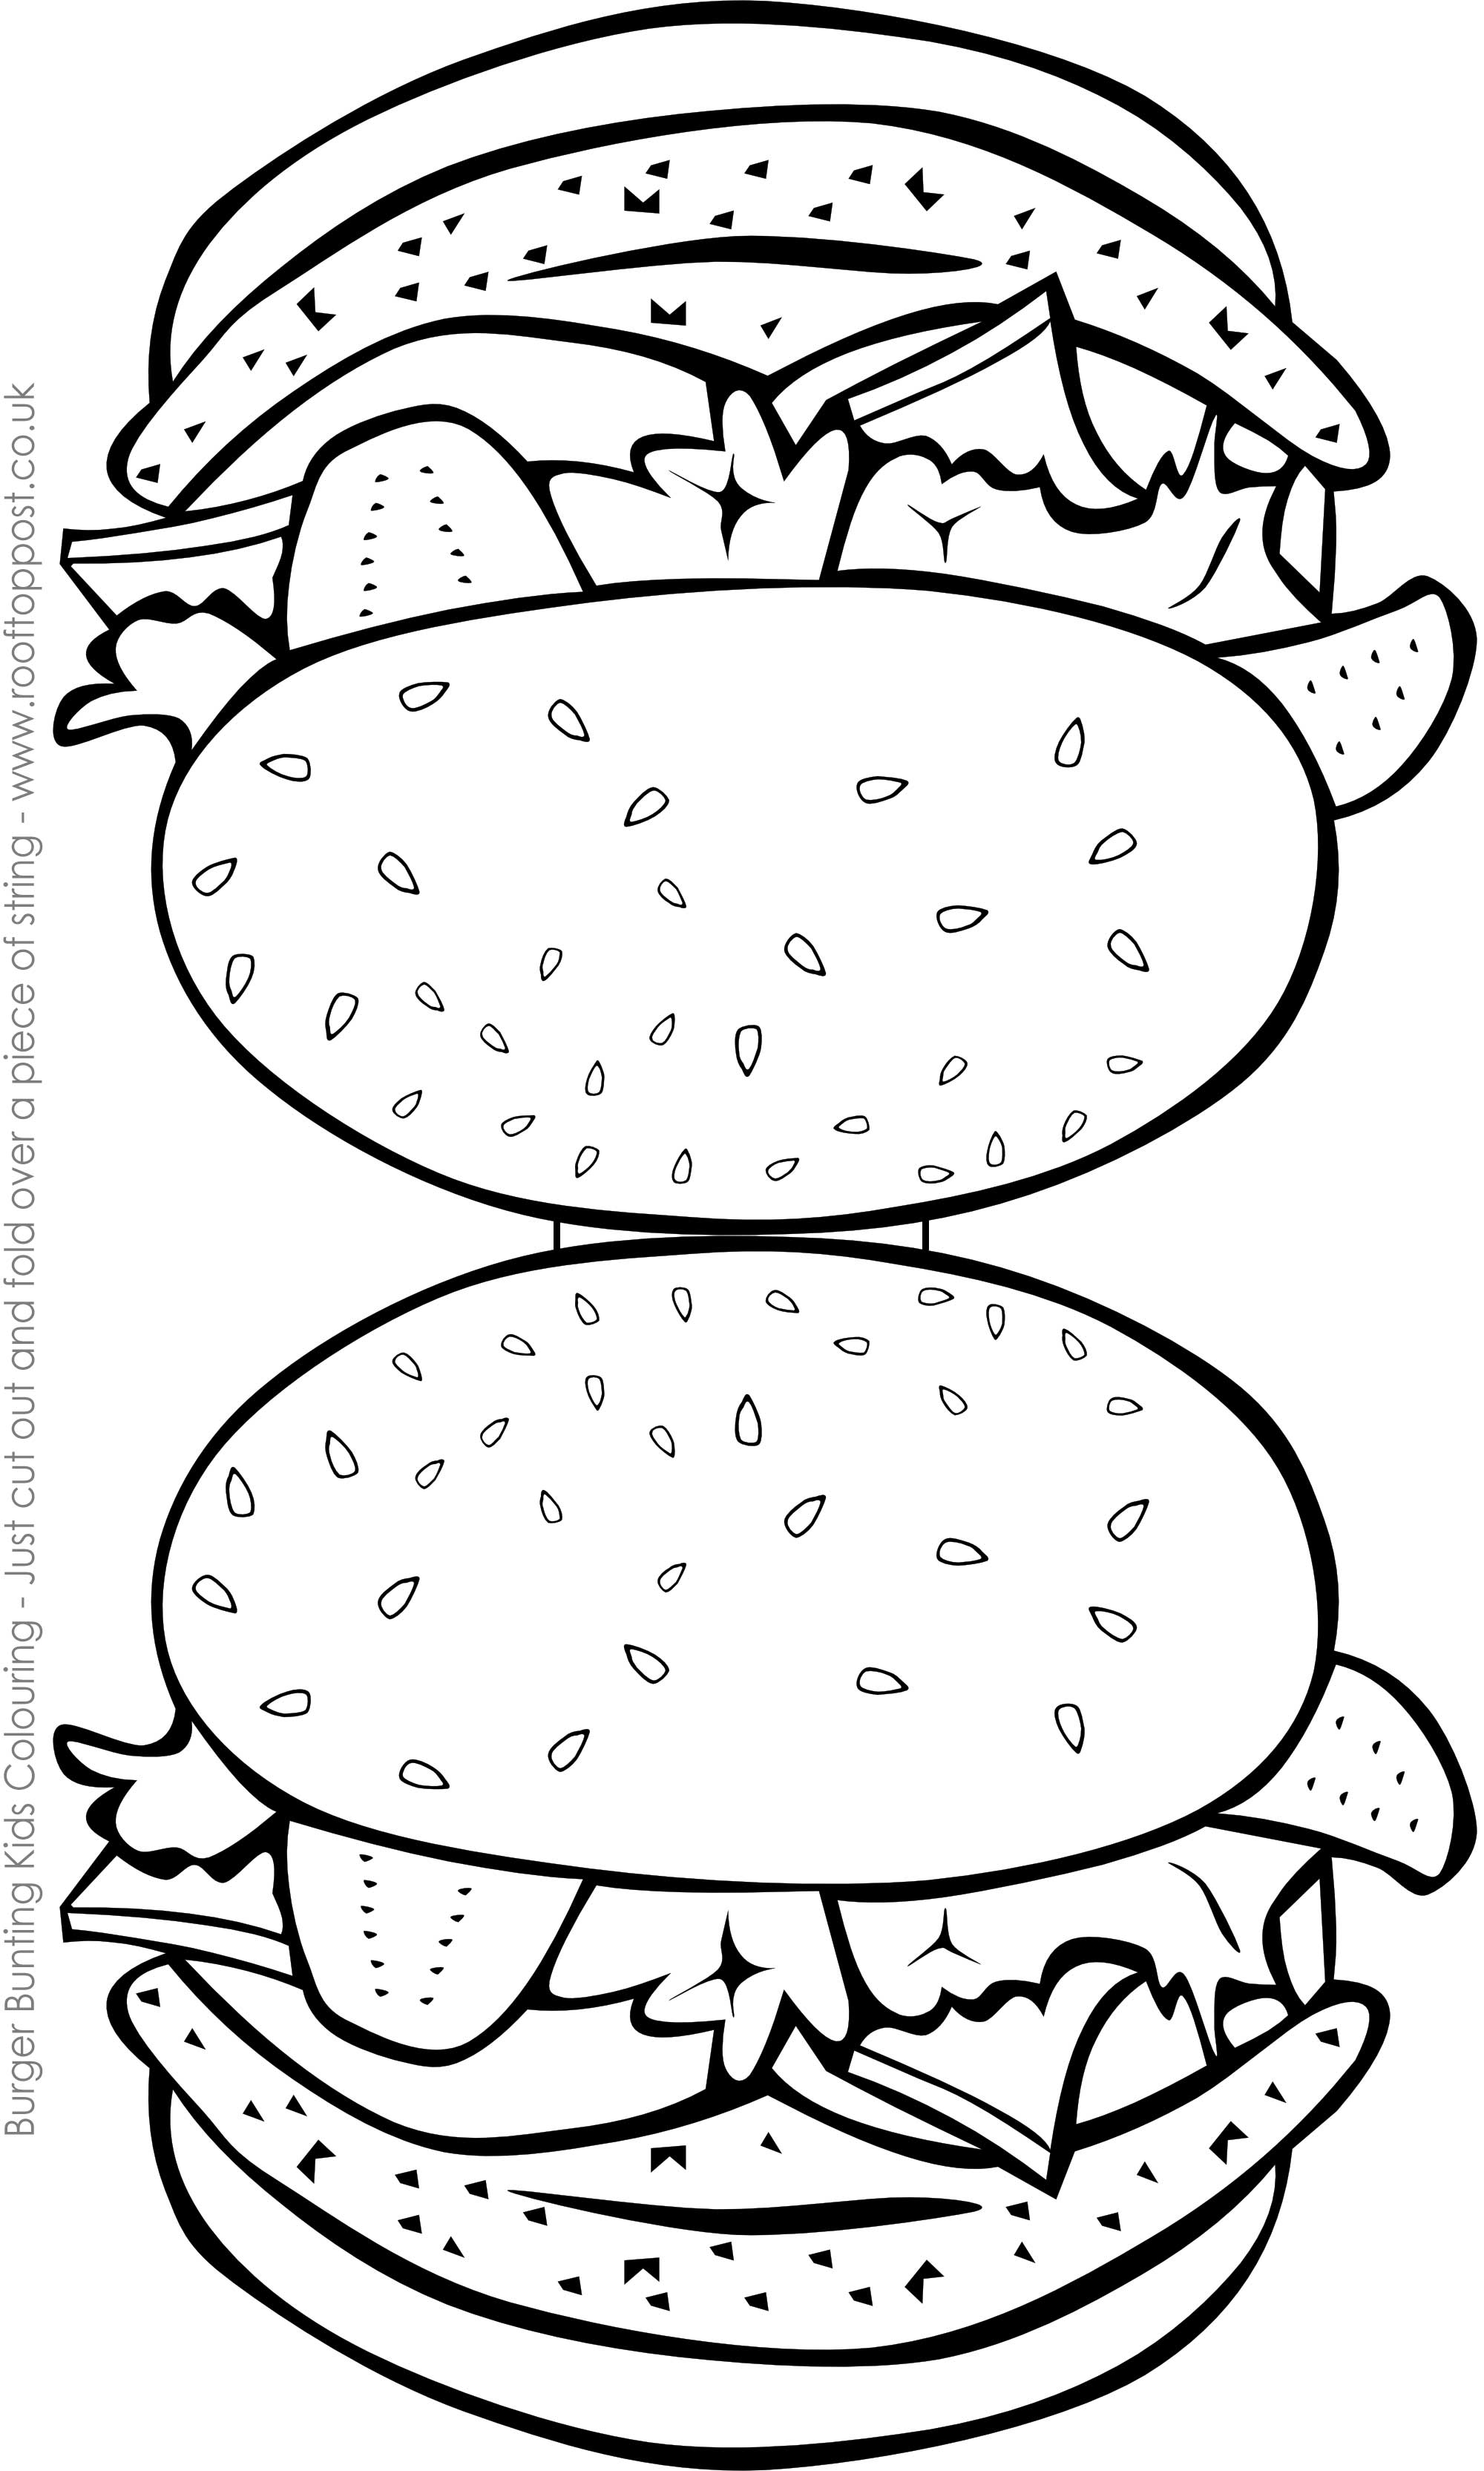 Burger-shaped bunting children can colour in and make